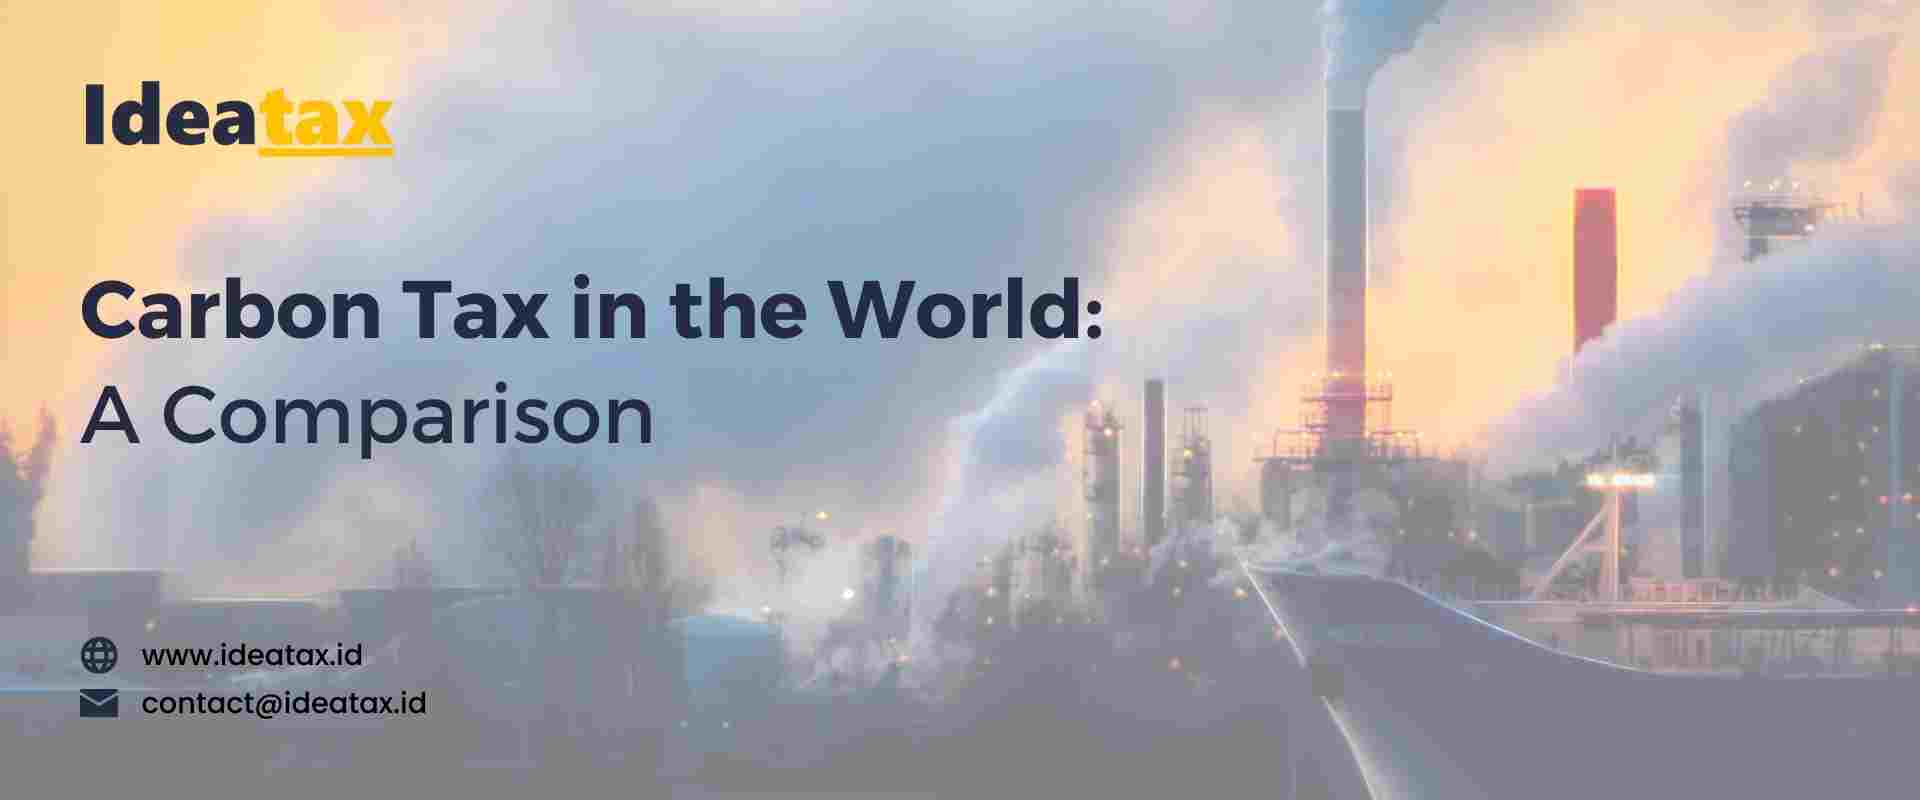 Carbon Tax in the World: A Comparison